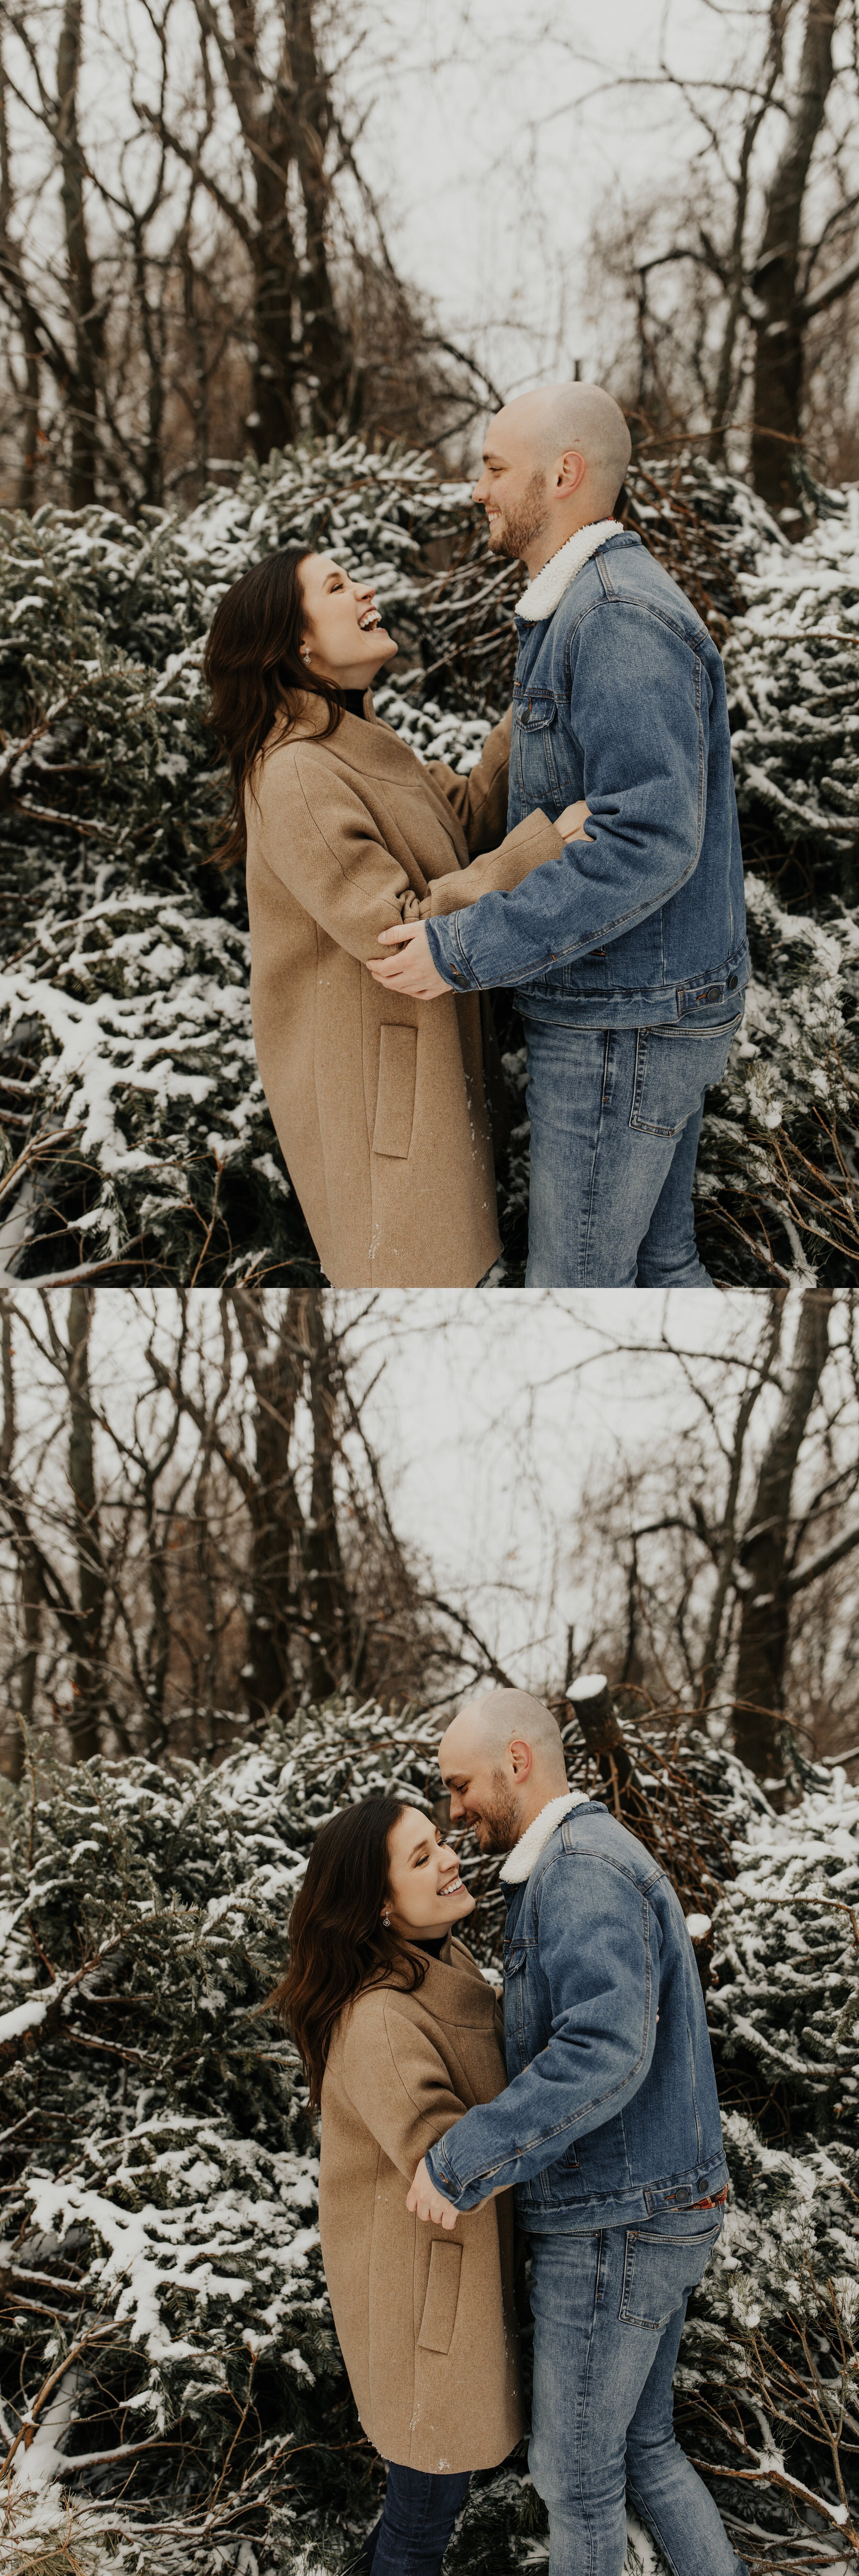 jessika-christine-photography-outdoor-engagement-couples-snow-adventurous-session (8).jpg